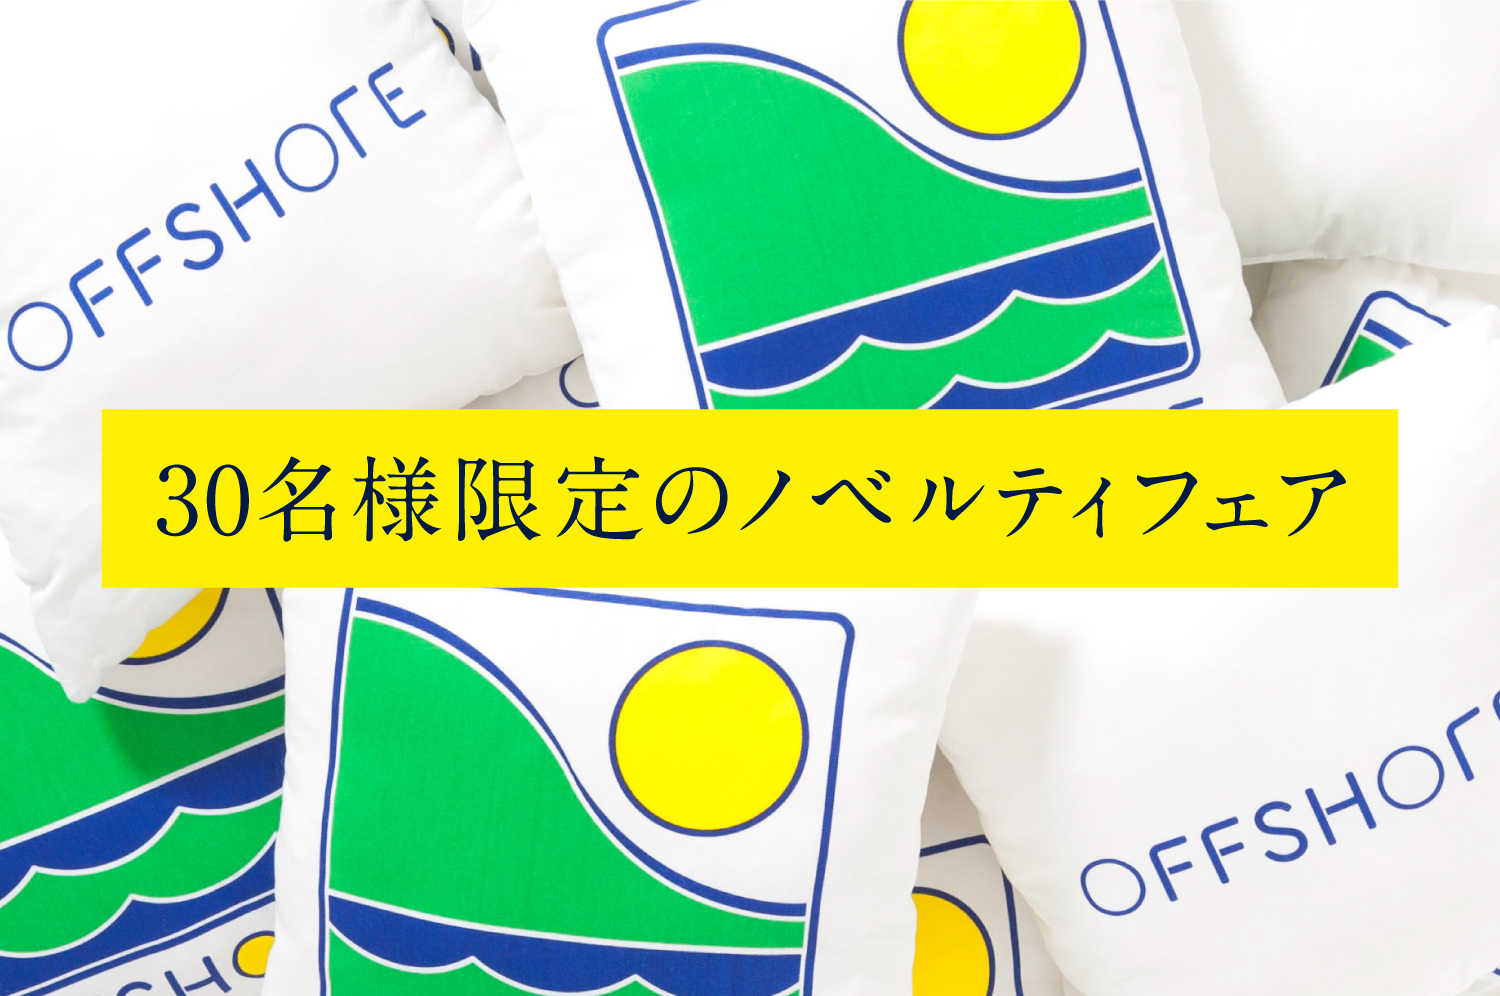 OFFSHOREクッション30個限定プレゼント!!